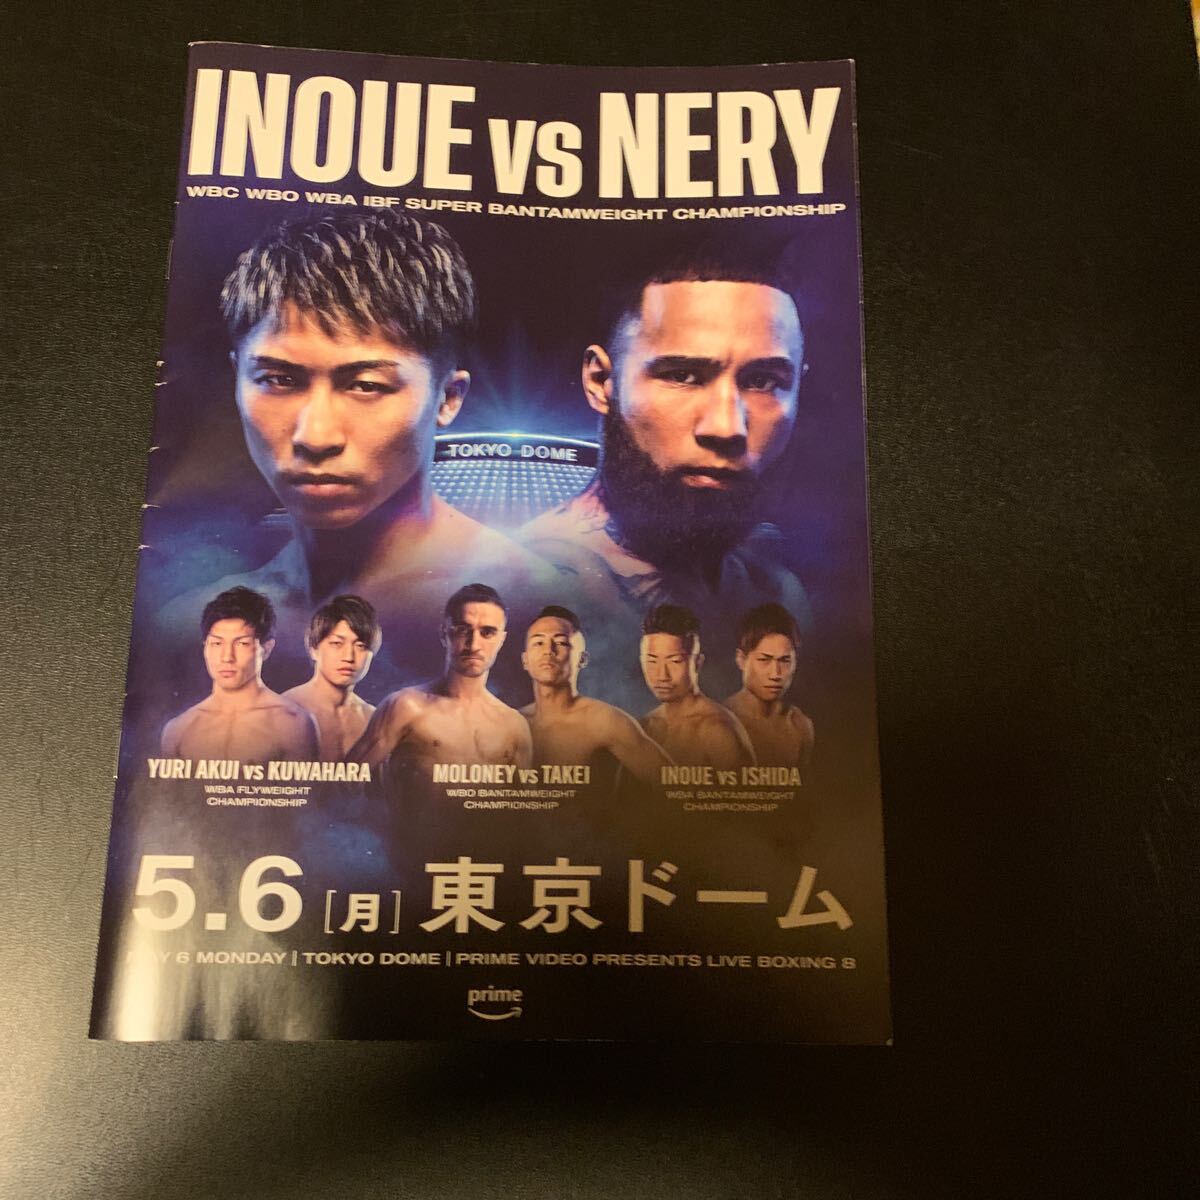  Inoue furthermore . Tokyo Dome 5 month 6 day Lewis neli ticket holder pamphlet number out newspaper 3 point set 